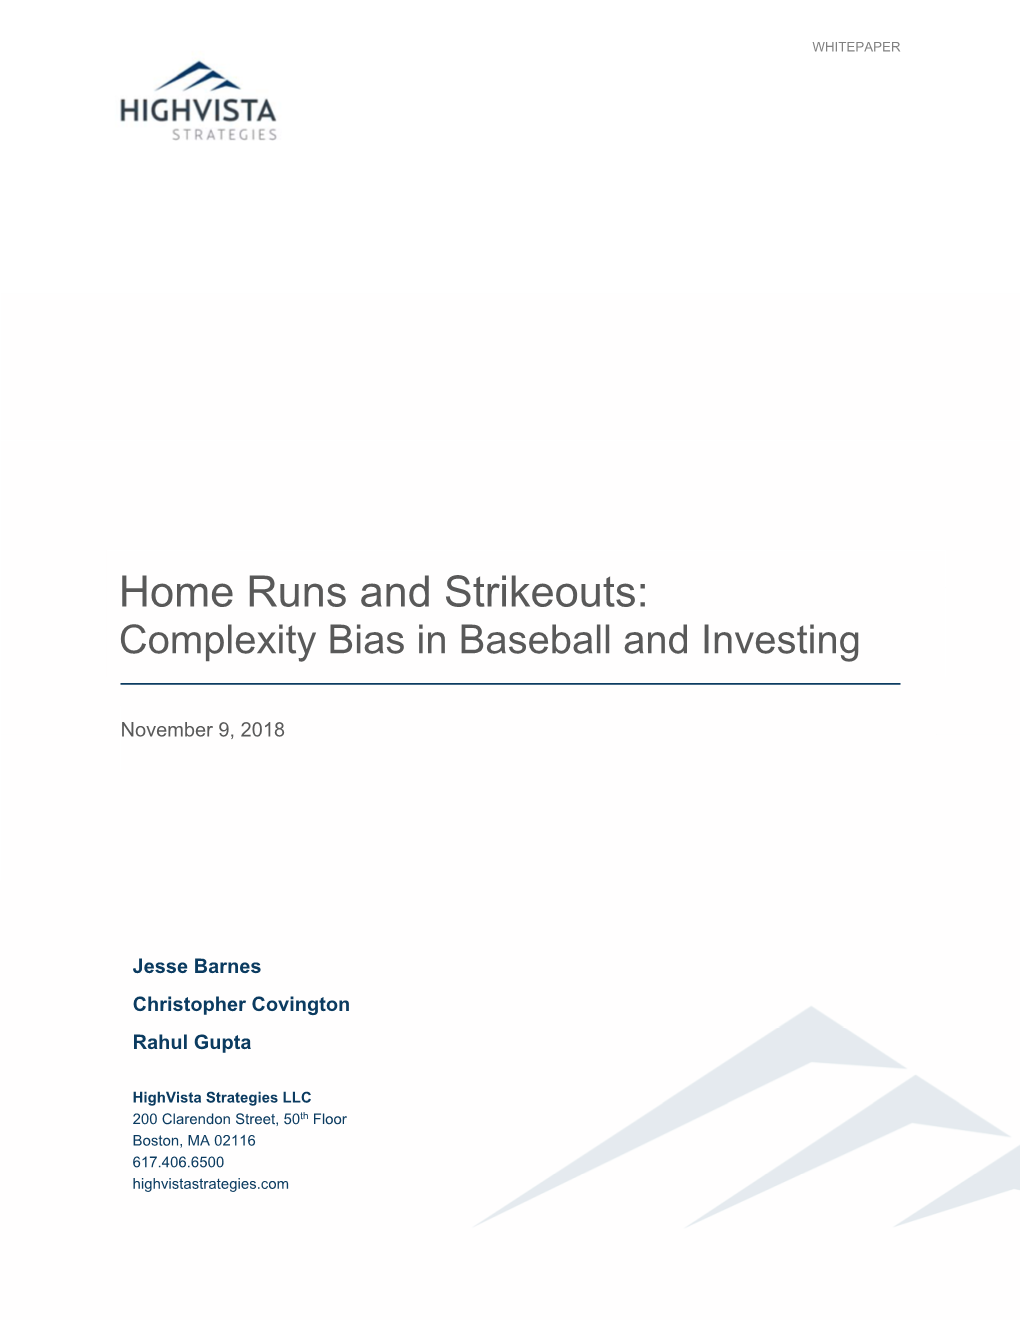 Home Runs and Strikeouts: Complexity Bias in Baseball and Investing